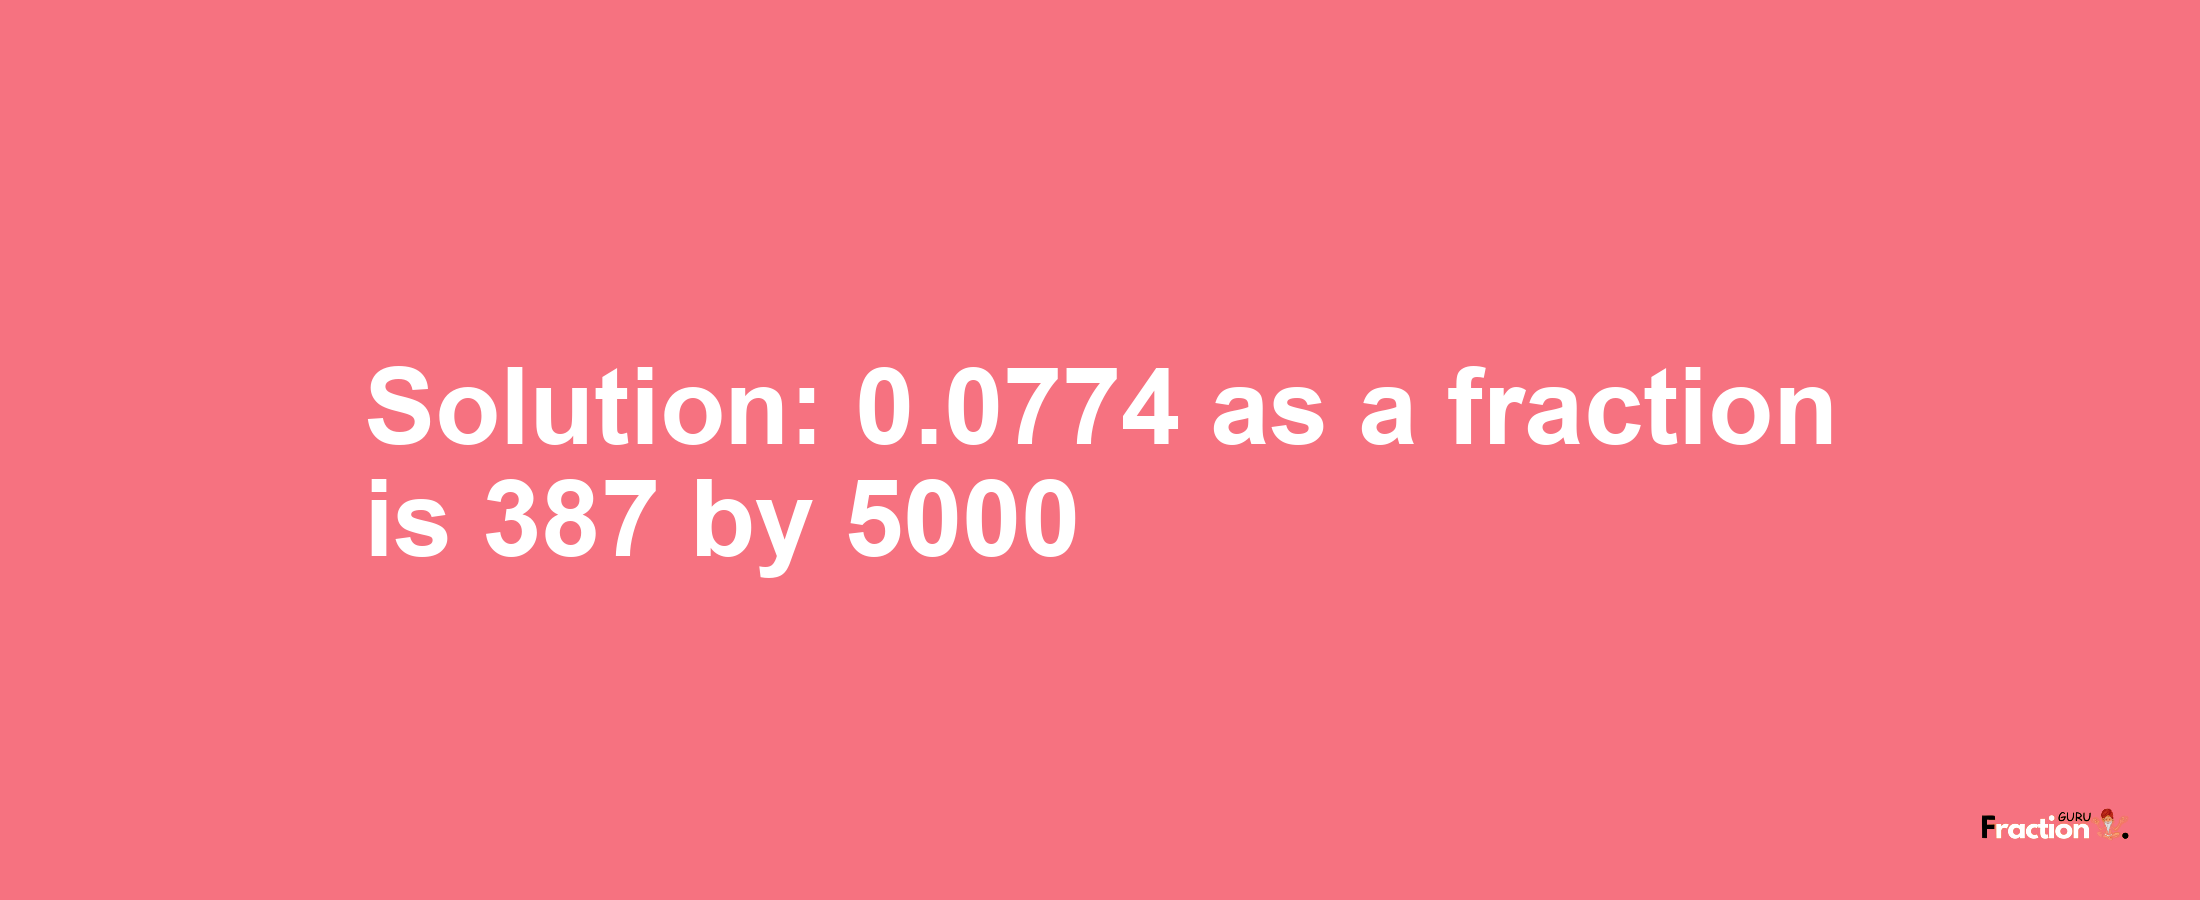 Solution:0.0774 as a fraction is 387/5000